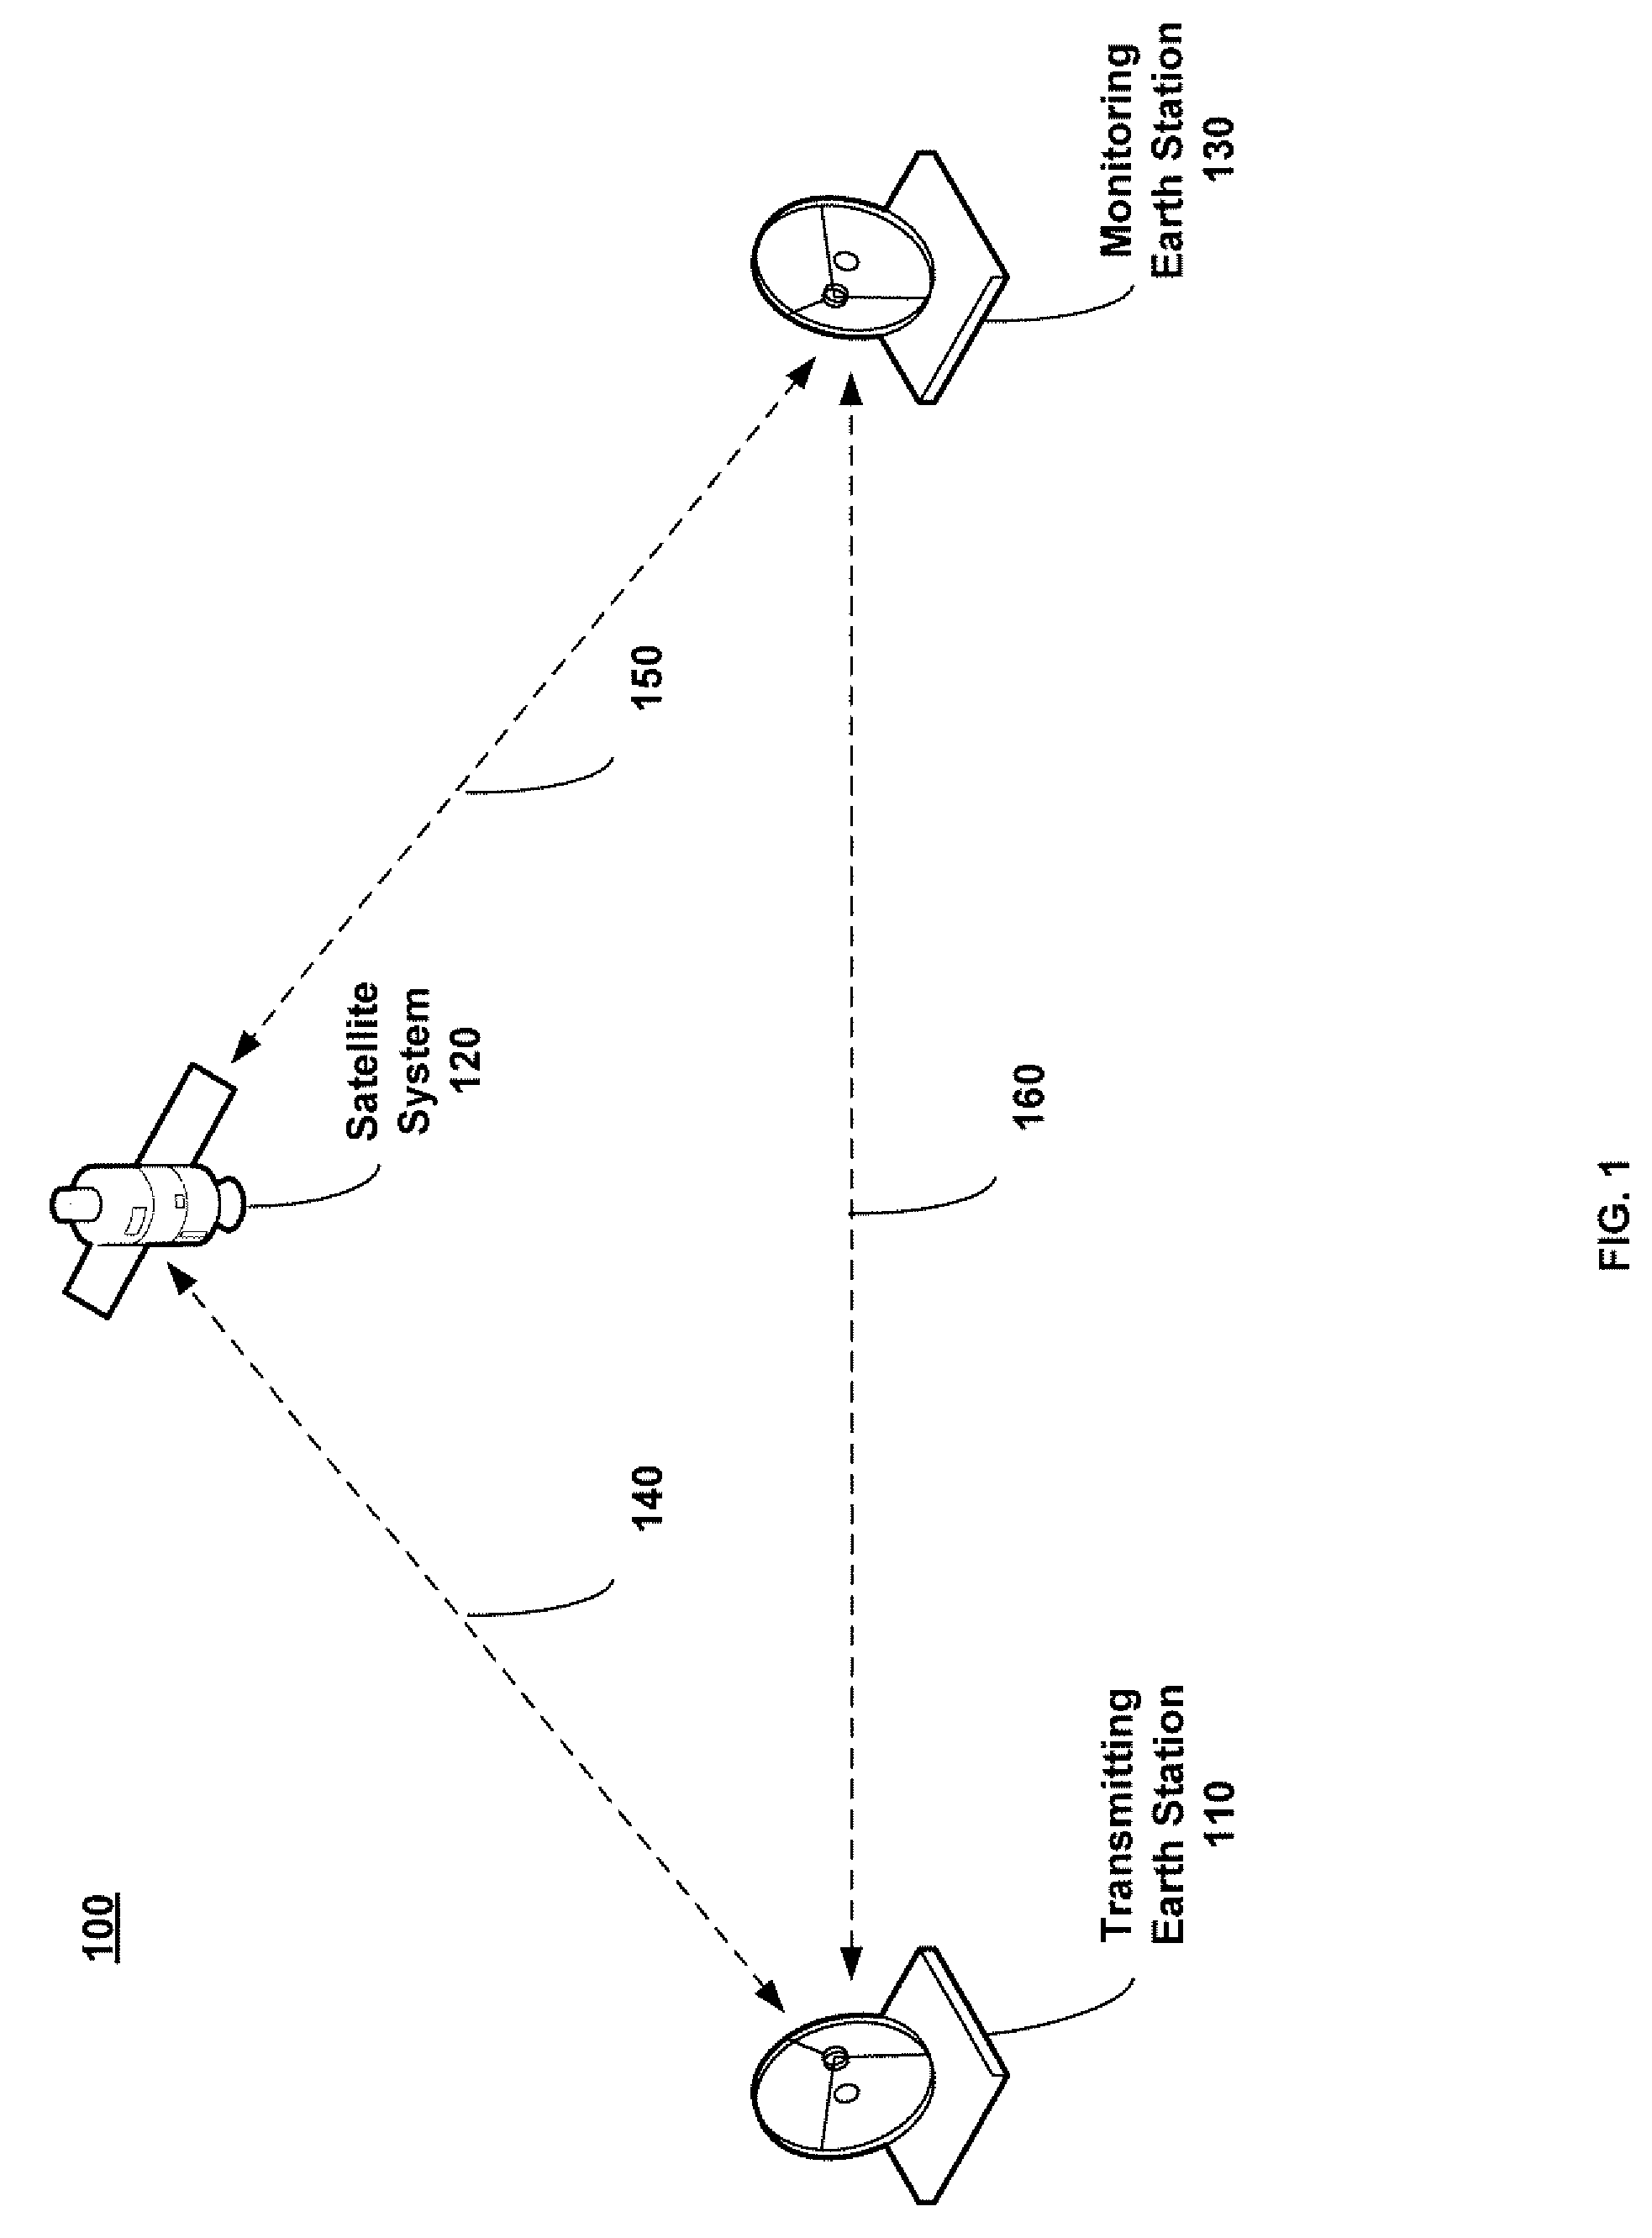 METHOD AND SYSTEM FOR MEASURING CROSS-POLARIZATION ISOLATION VALUE AND 1 dB GAIN COMPRESSION POINT